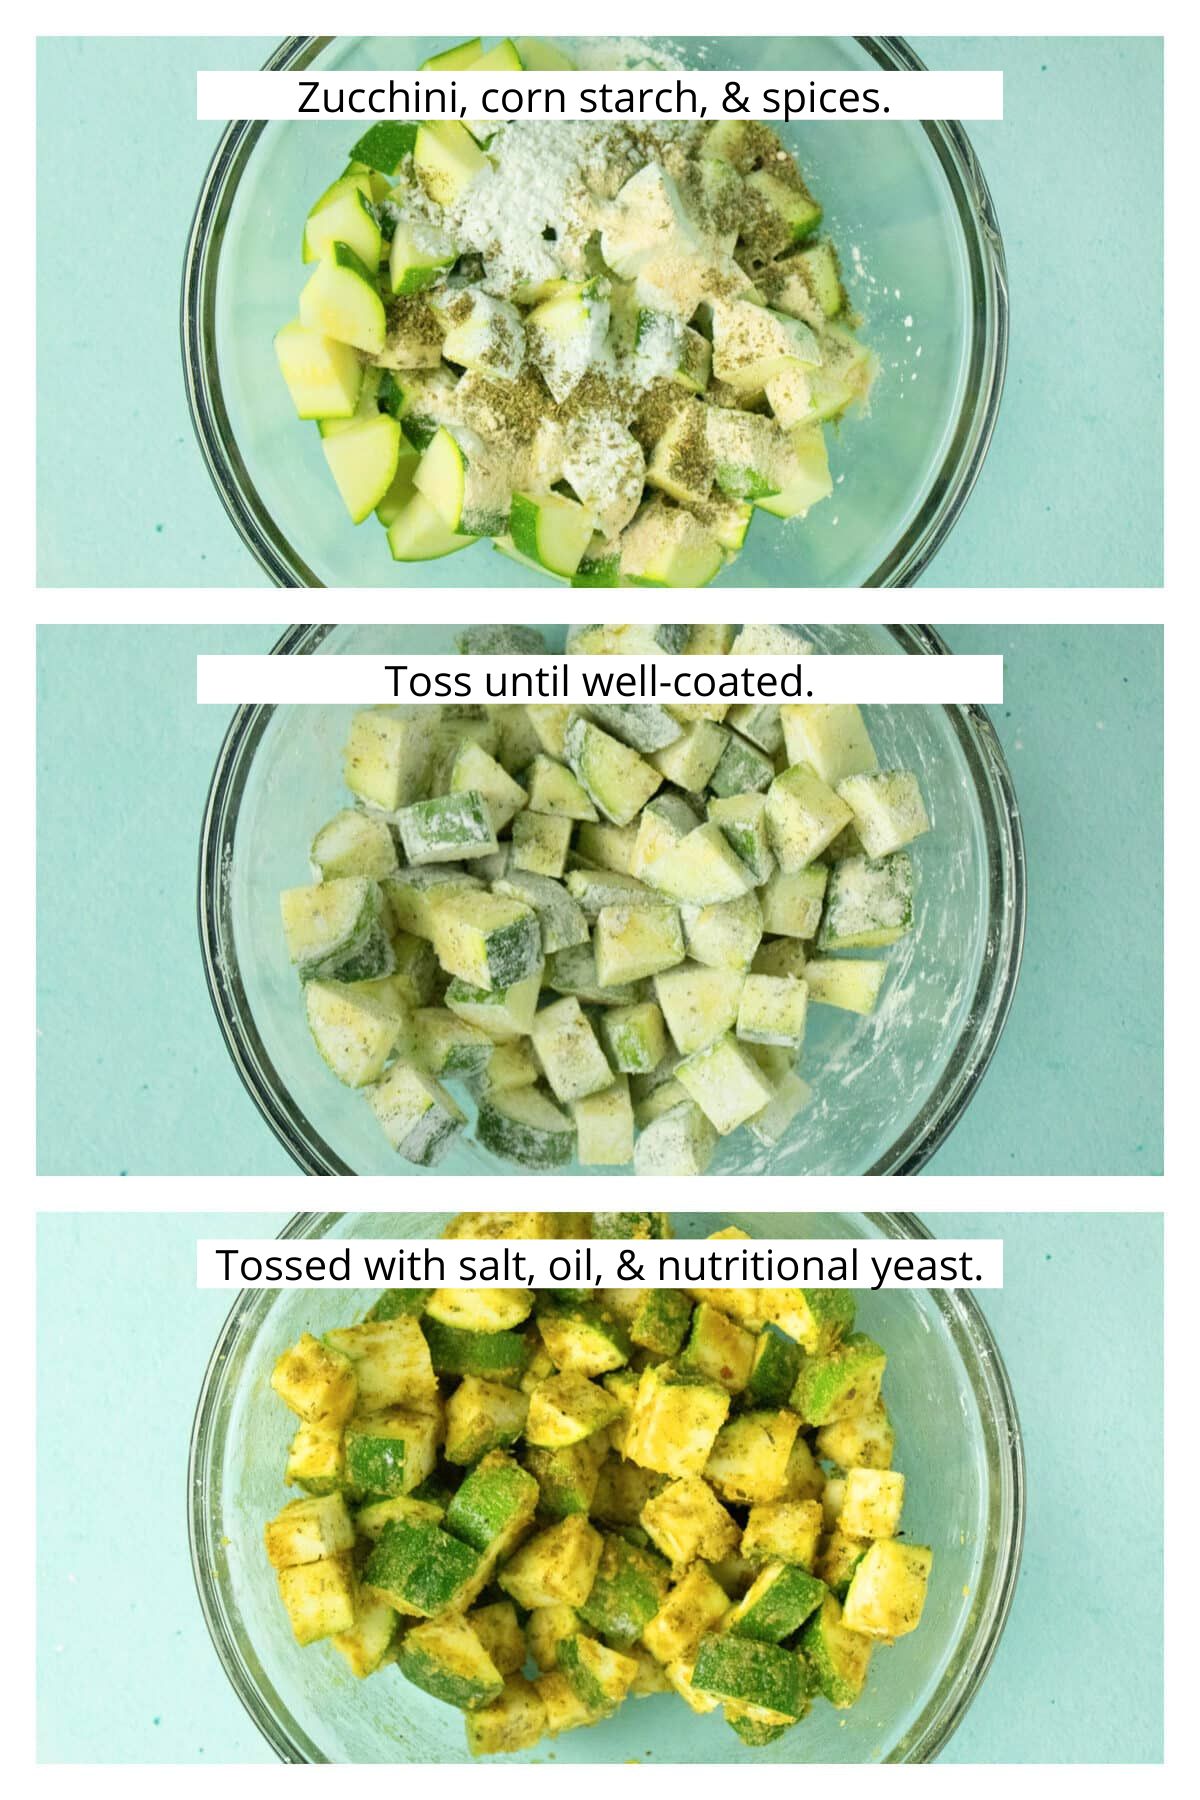 image collage with text showing zucchini pieces with corn starch and spices before and after tossing and after tossing with the nutritional yeast, oil, and salt